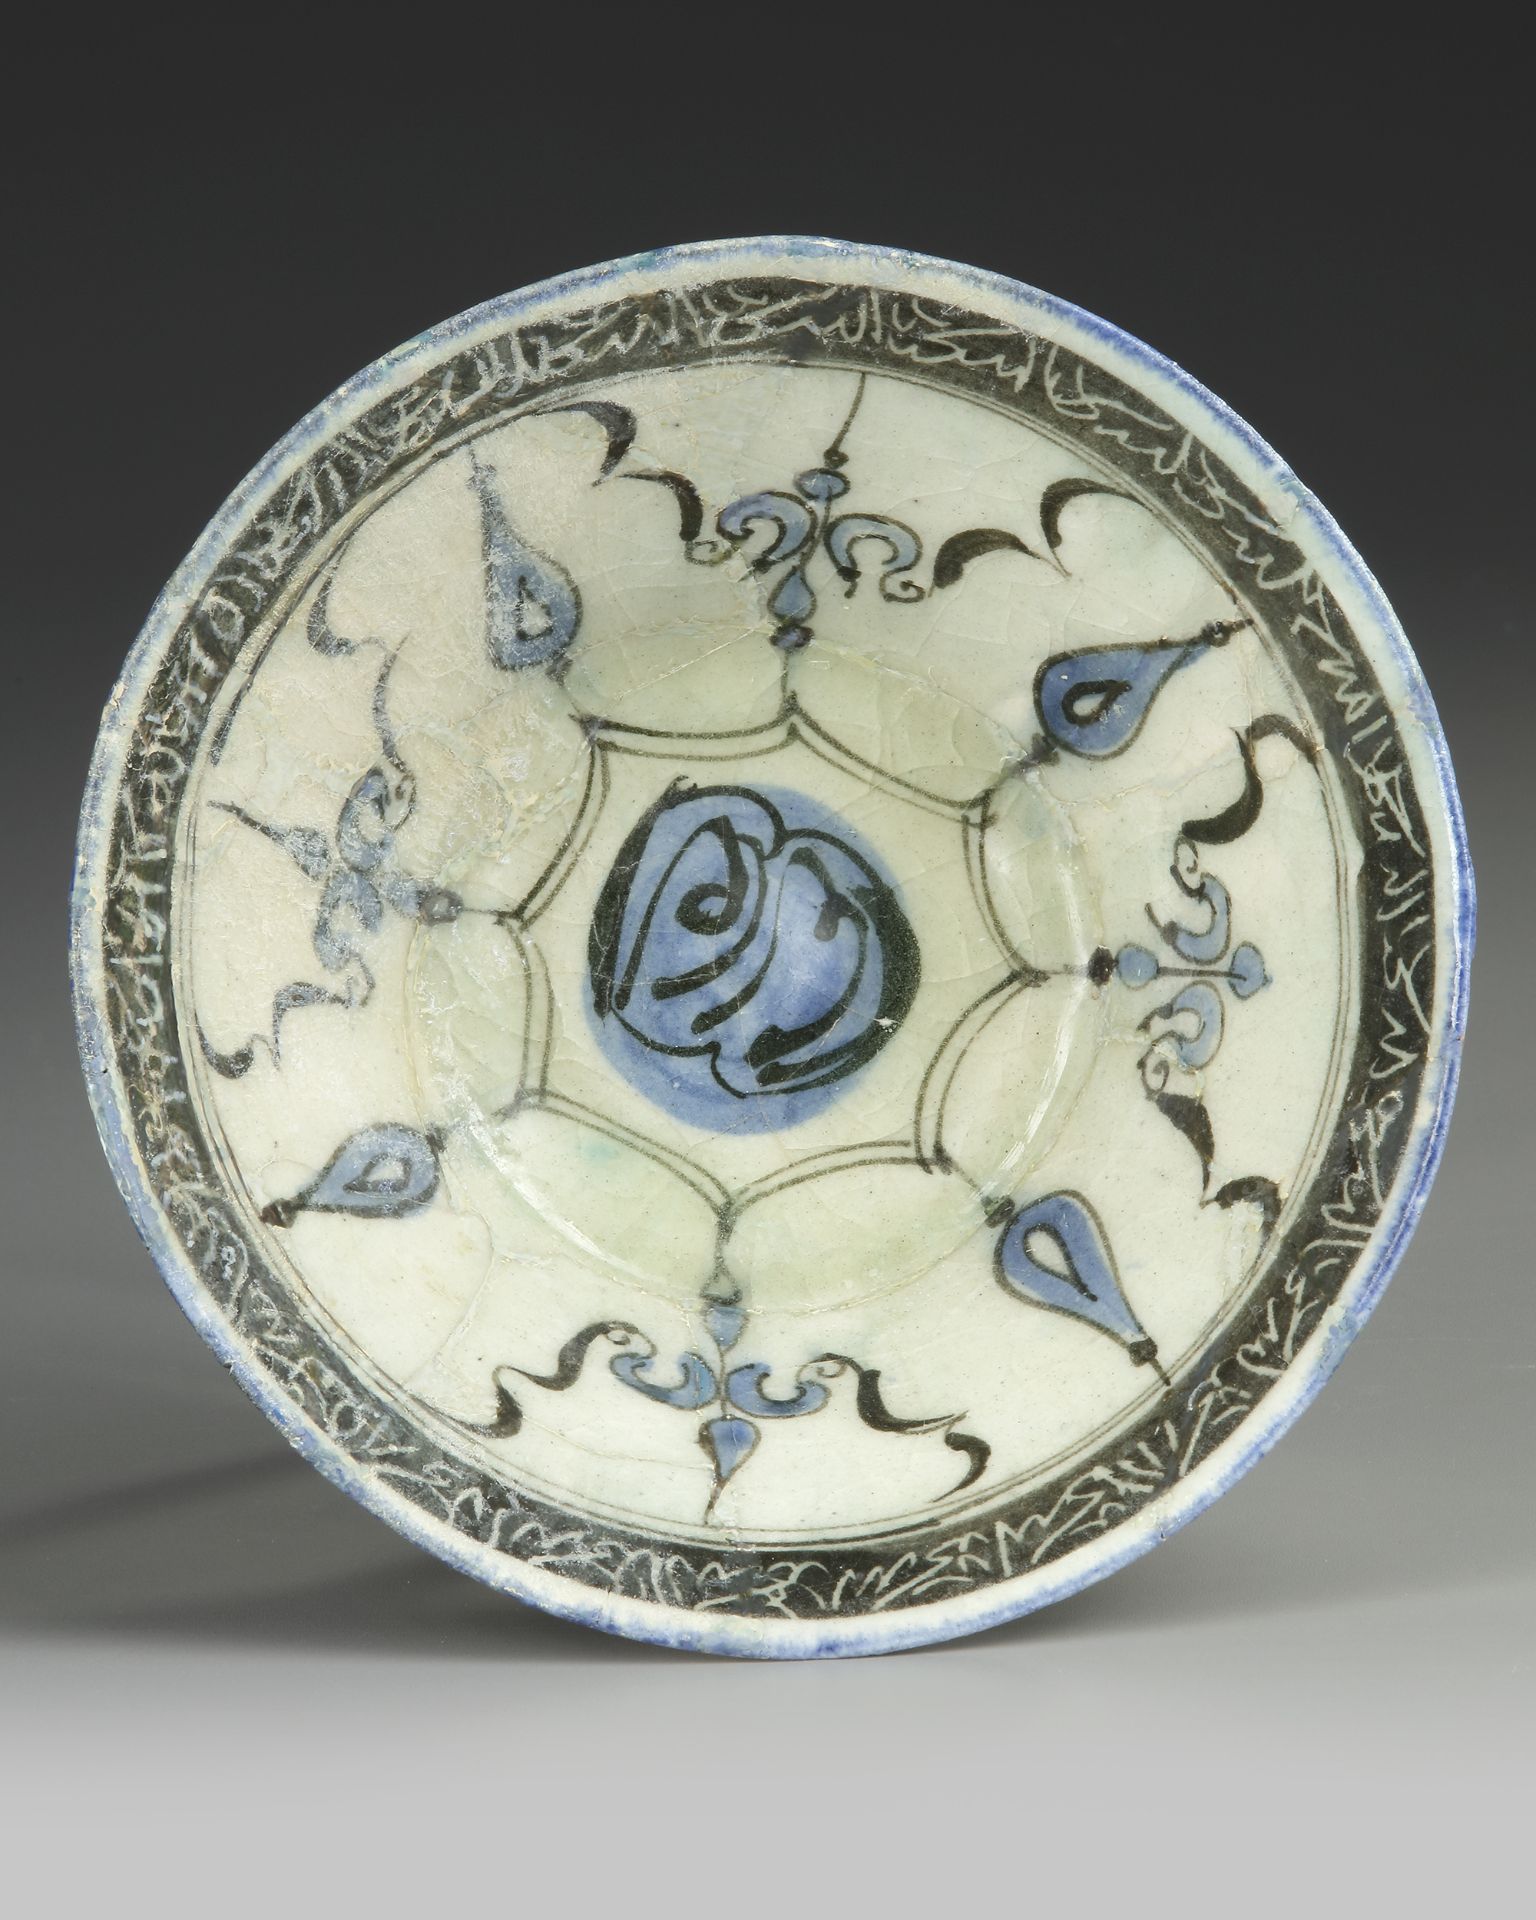 A KASHAN POTTERY BOWL, PERSIA 13TH CENTURY